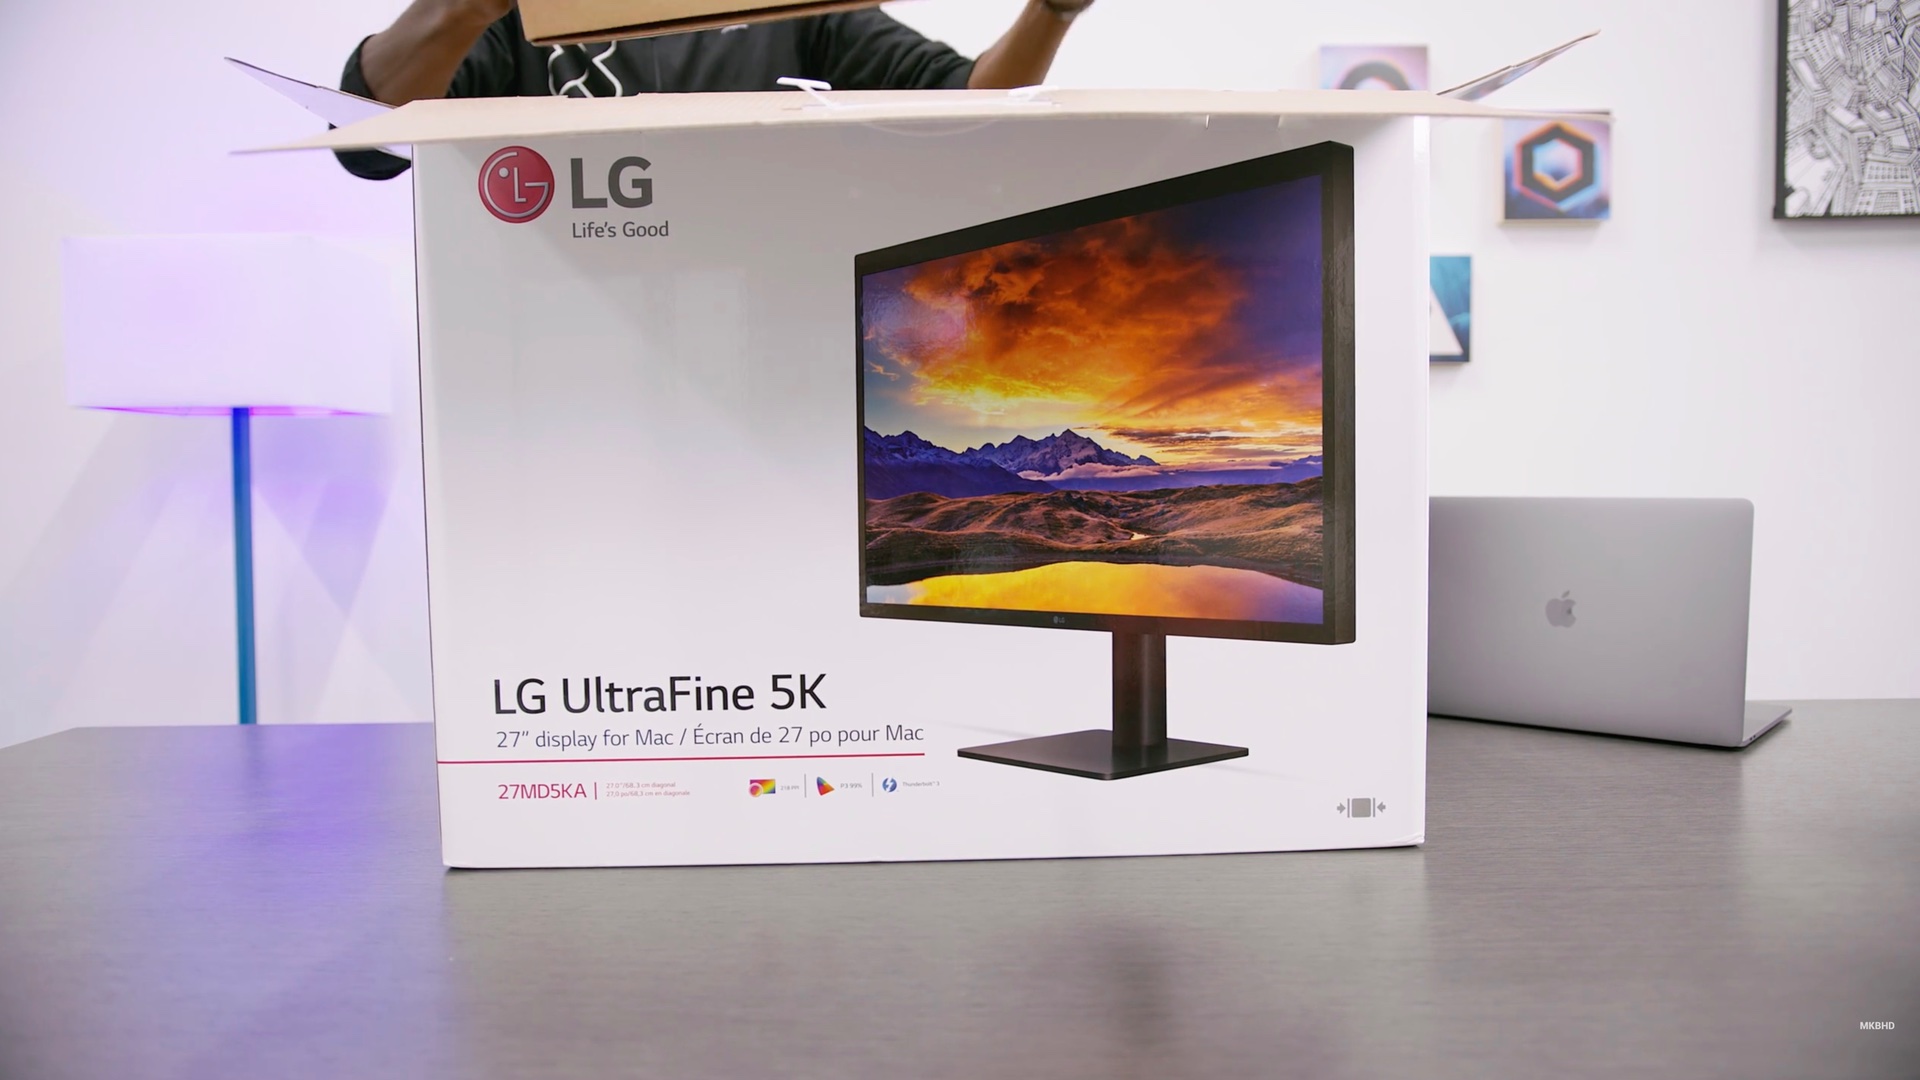 First LG UltraFine 5K Display hands-on unboxing appears [Video